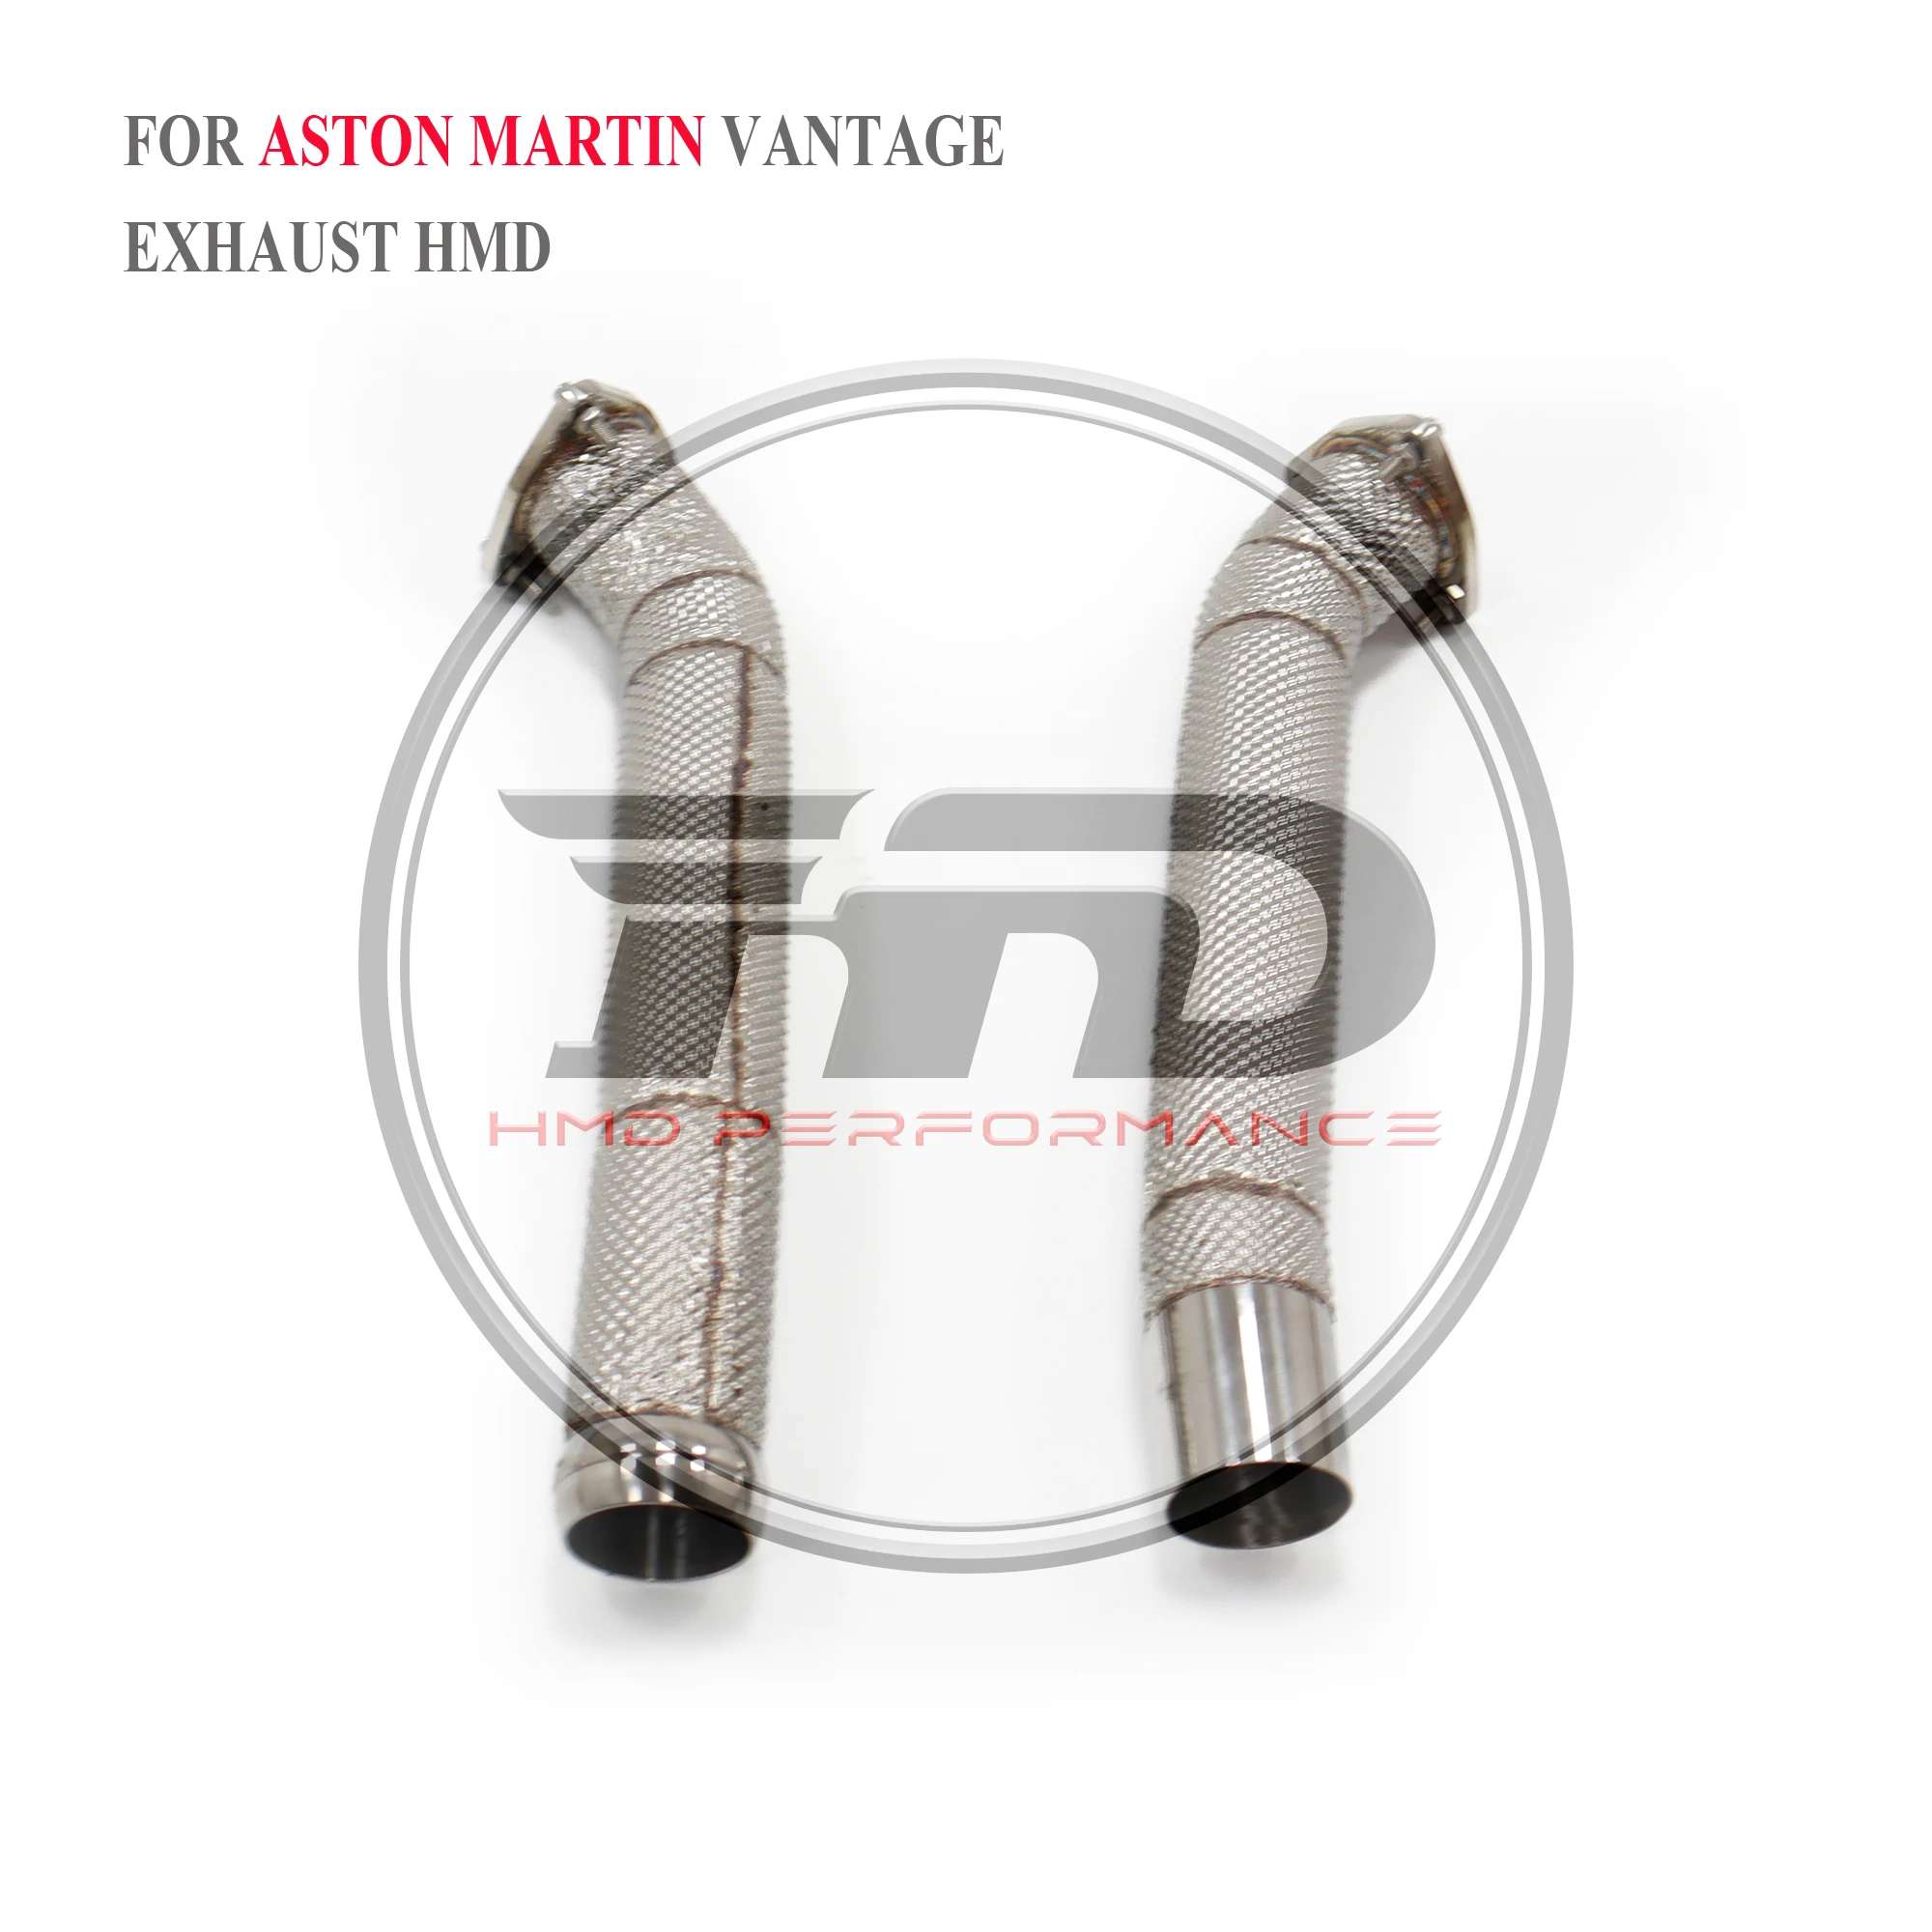 

HMD Exhaust System Performance Middle Pipe for Aston Martin Vantage V8 4.0T With Heat Shield Racing Pipe